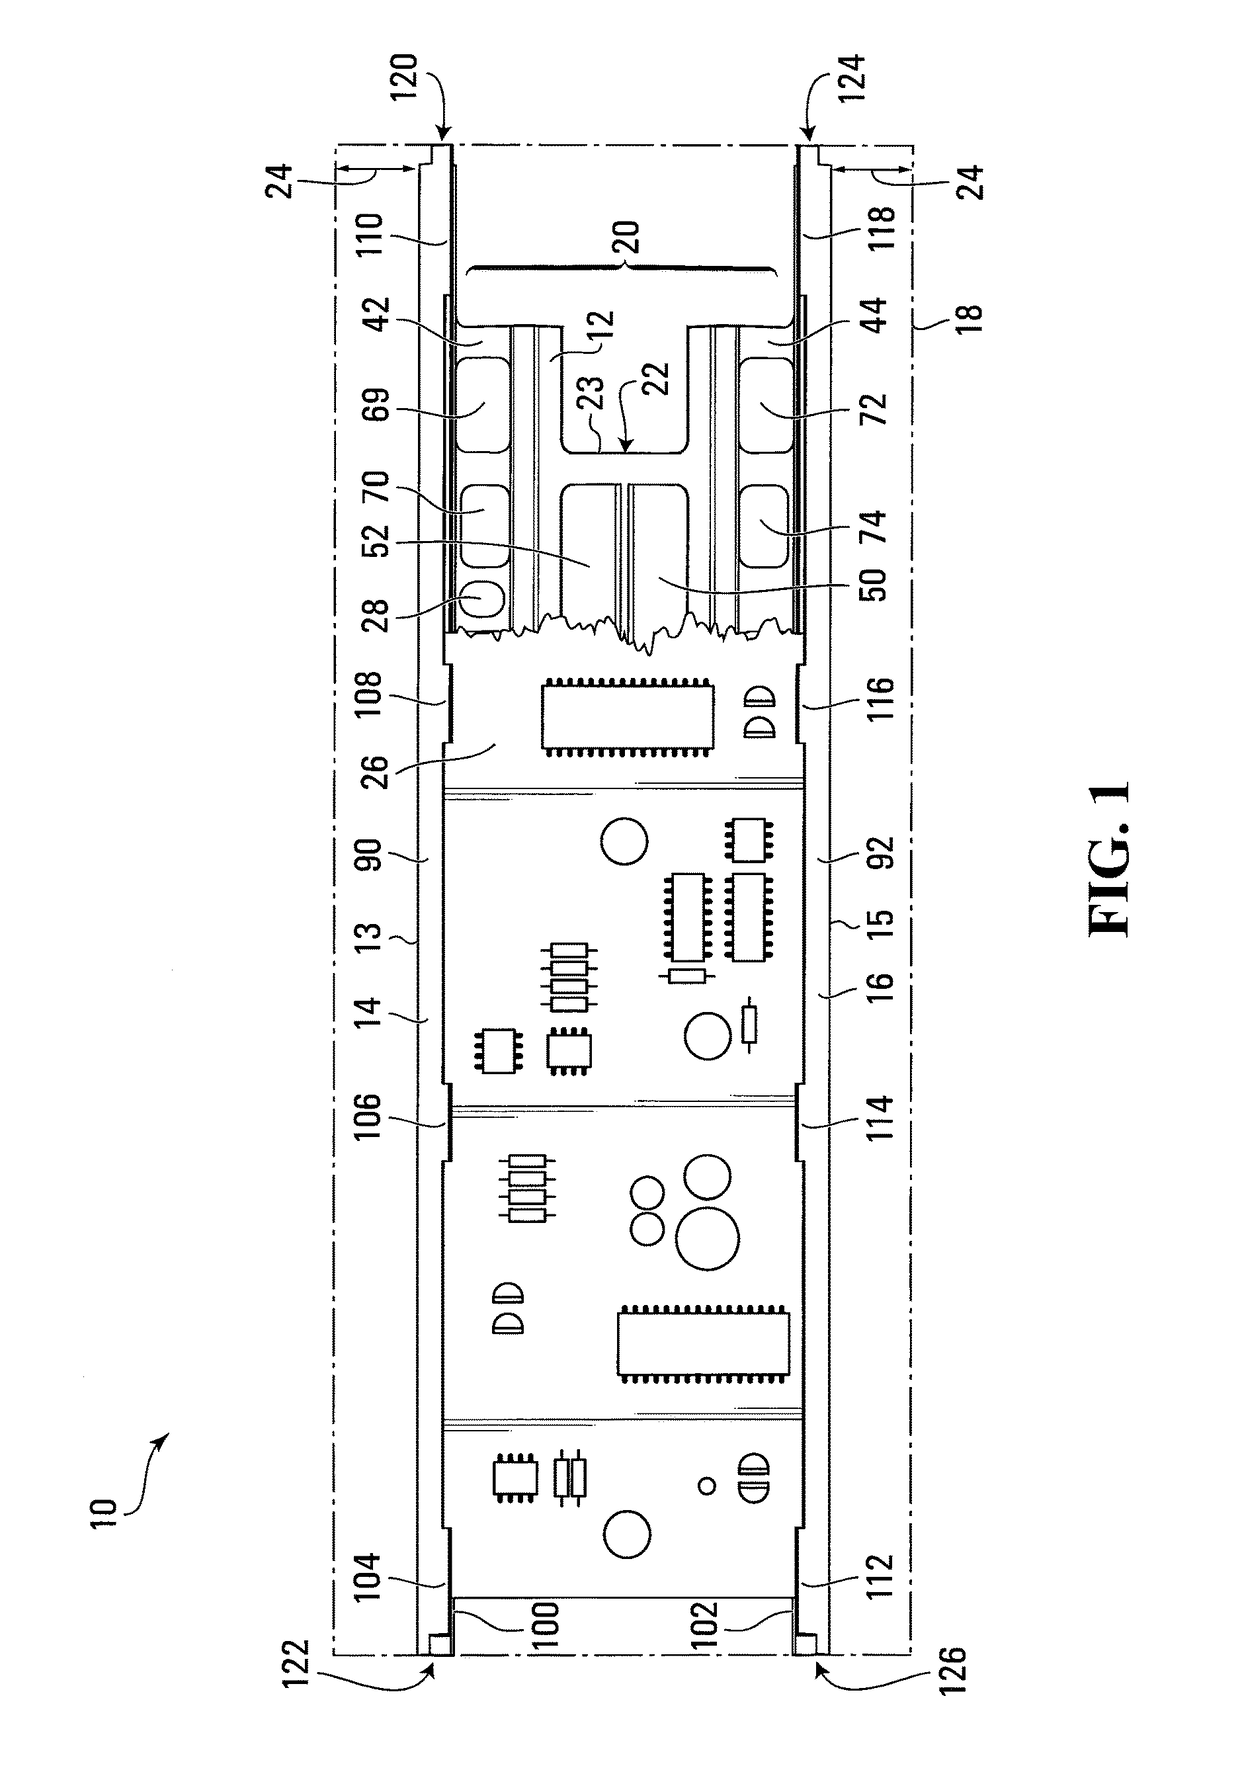 Mounting and component holder apparatuses and assemblies for holding rigid components